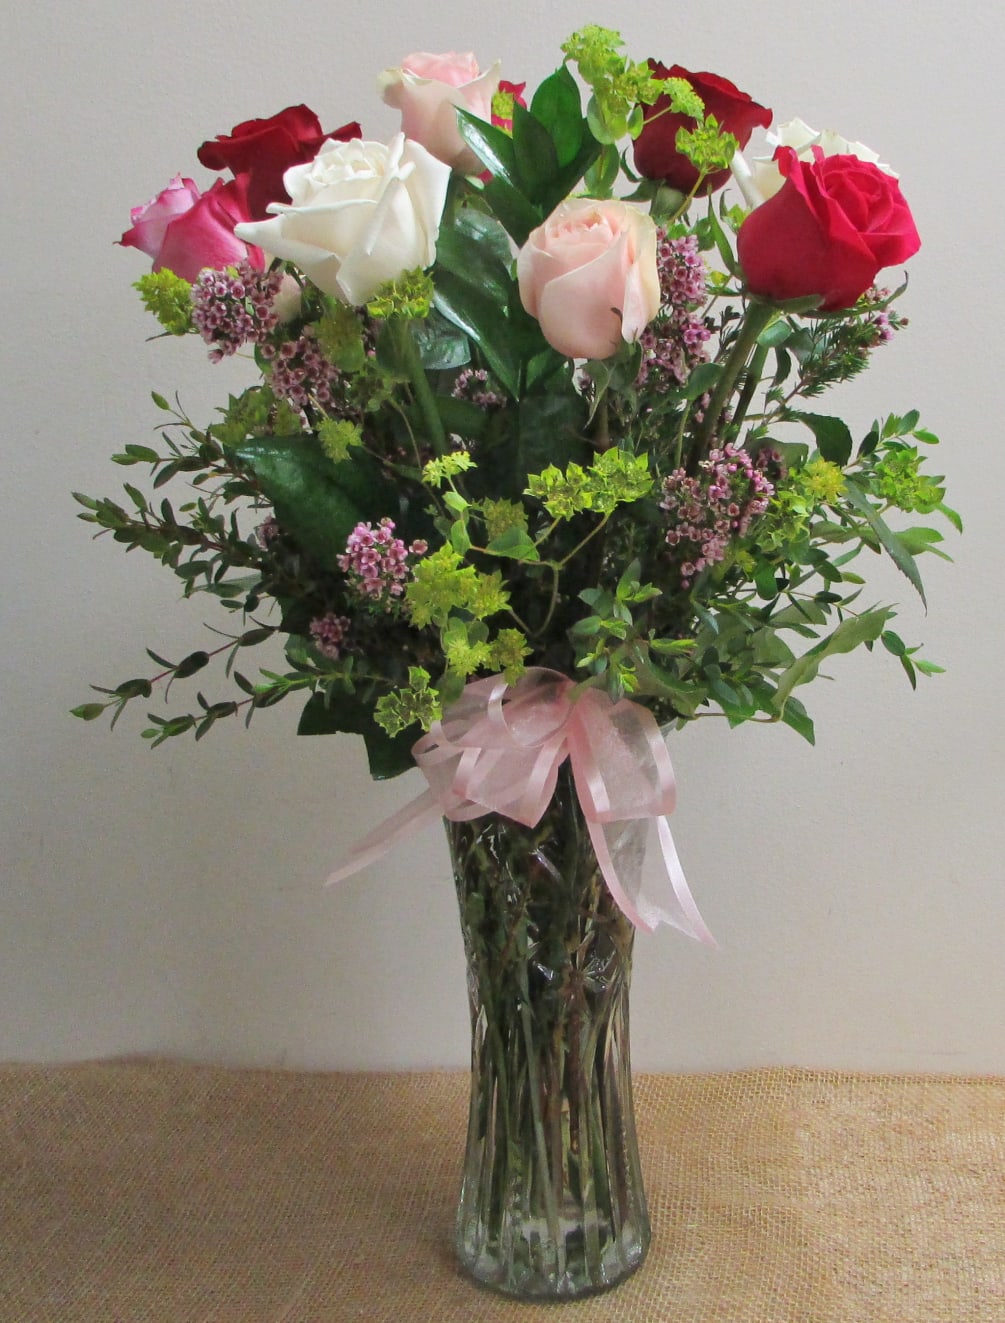 A beautiful arrangement of one dozen assorted color roses. The pops of